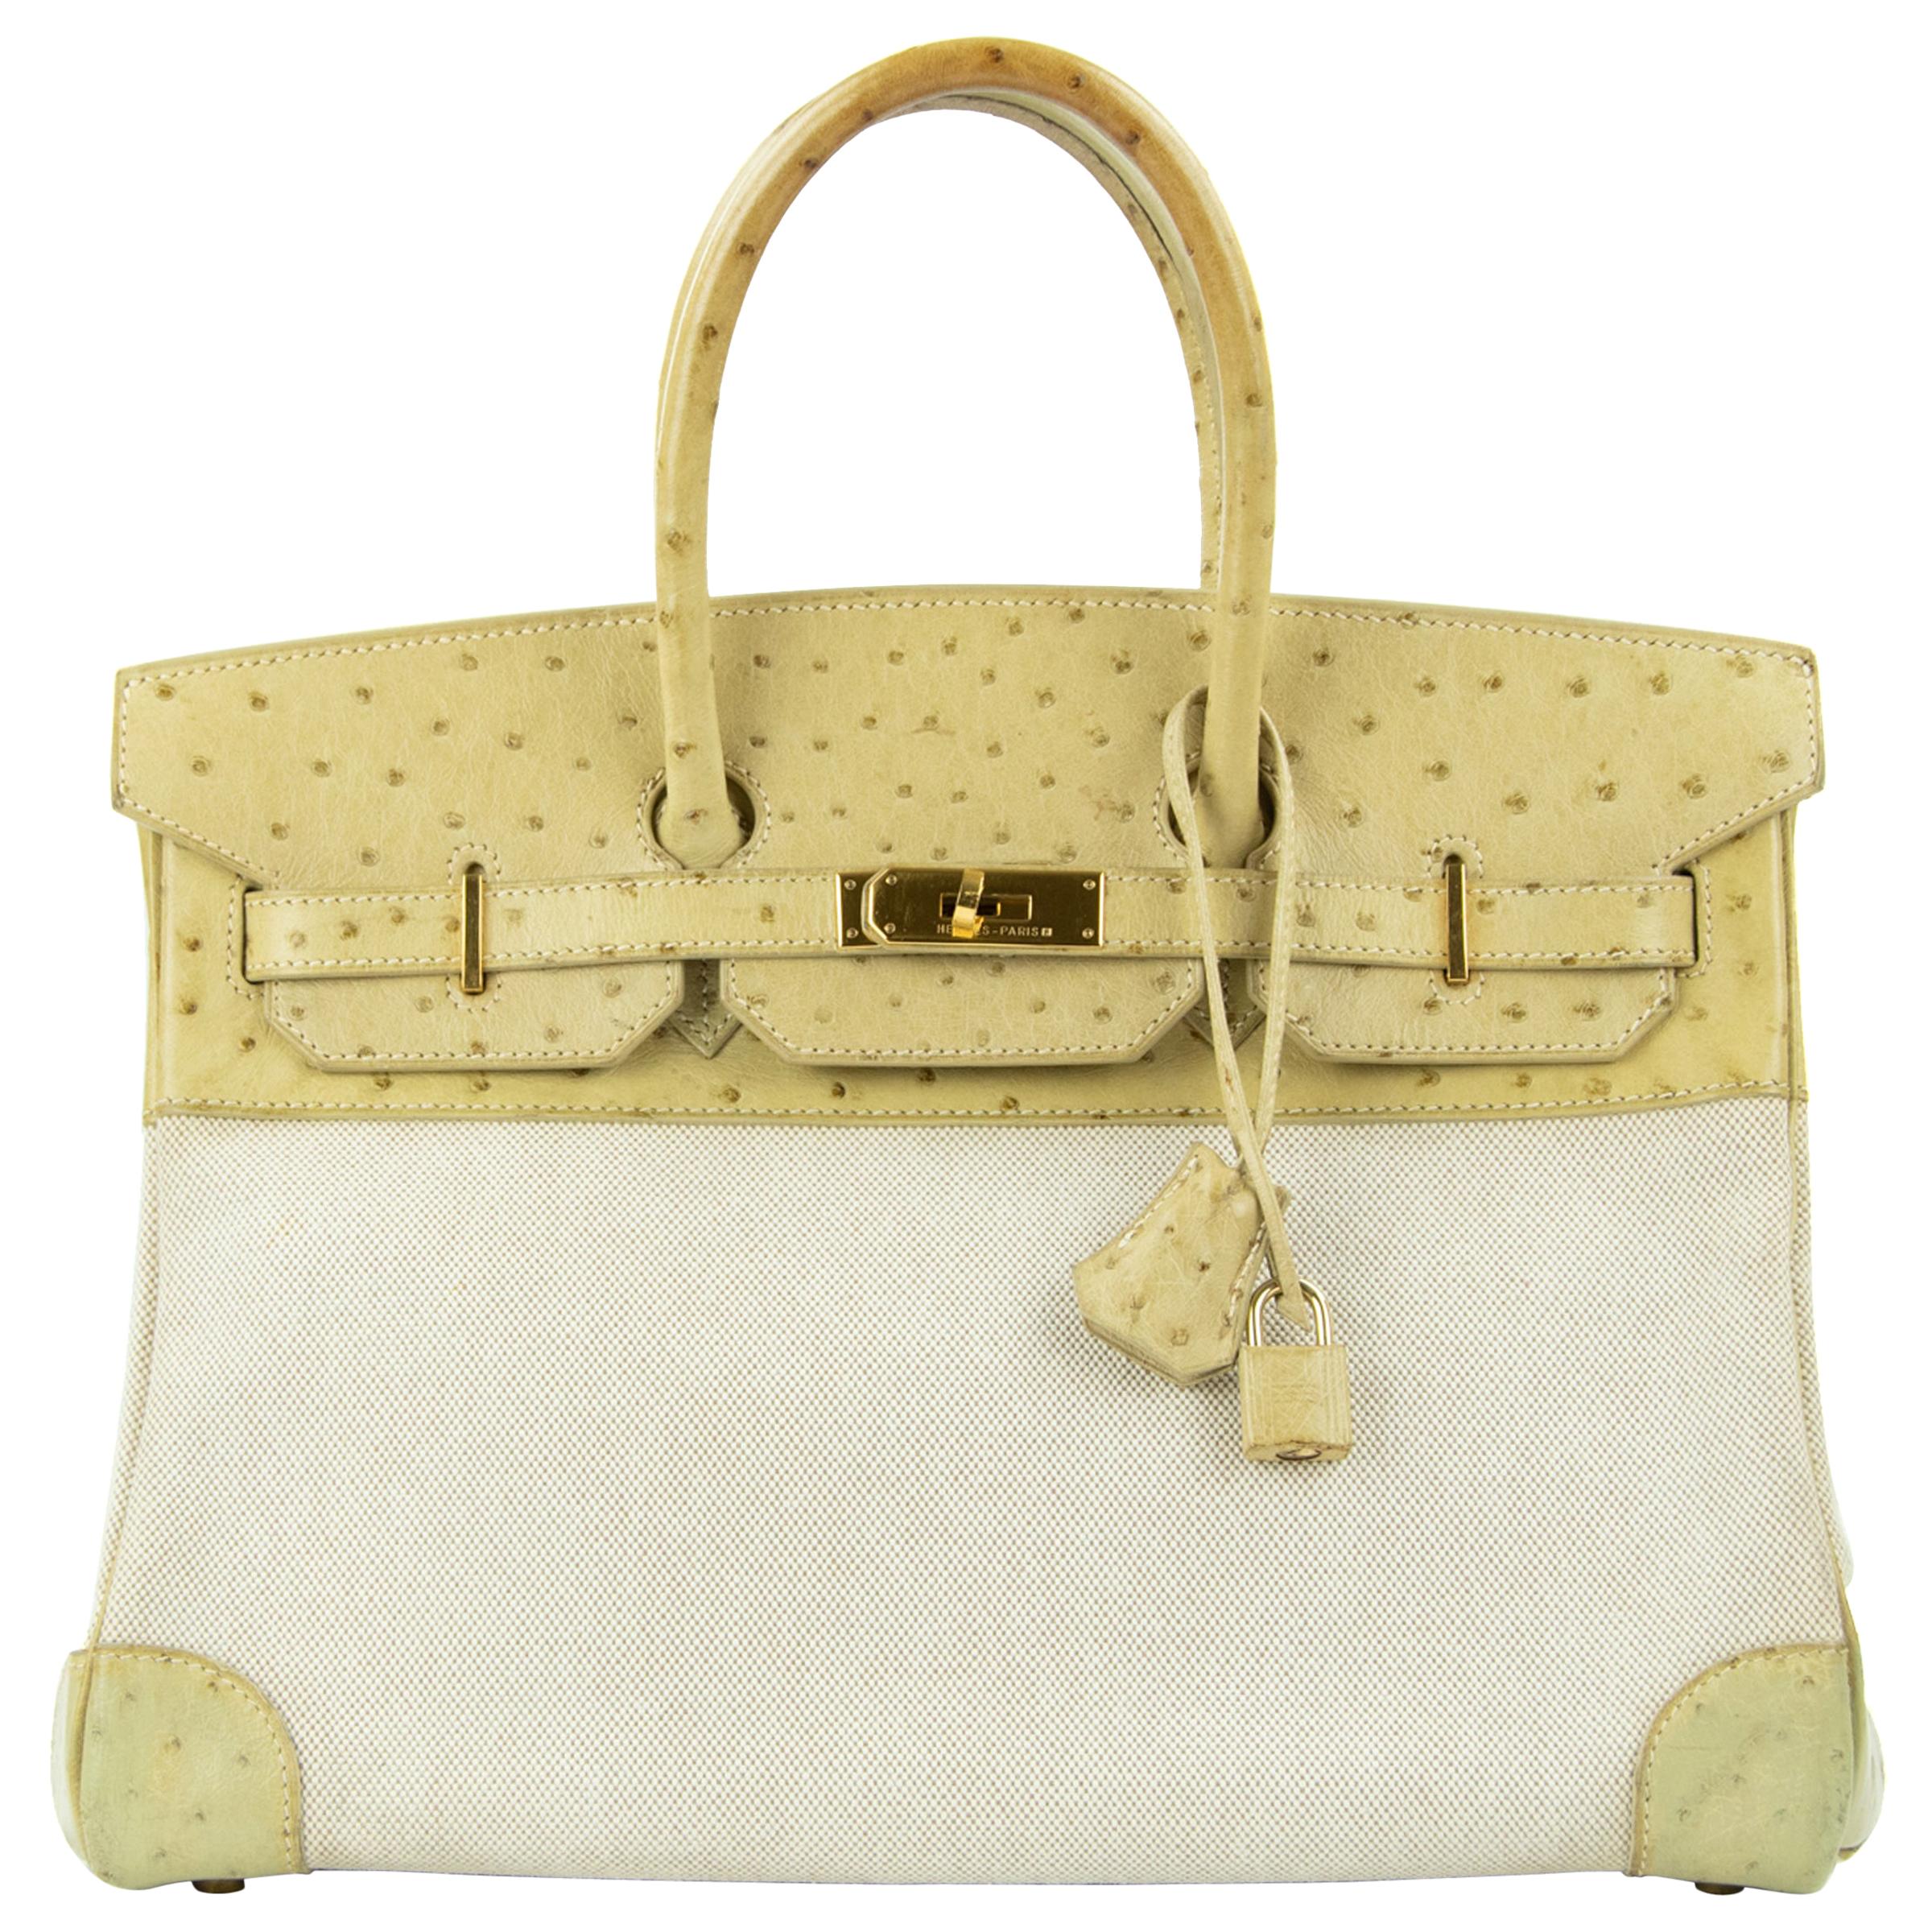 Hermes Birkin Bag 35cm Toile and Blanc Casse Ostrich GHW (Pre-Owned) im Angebot